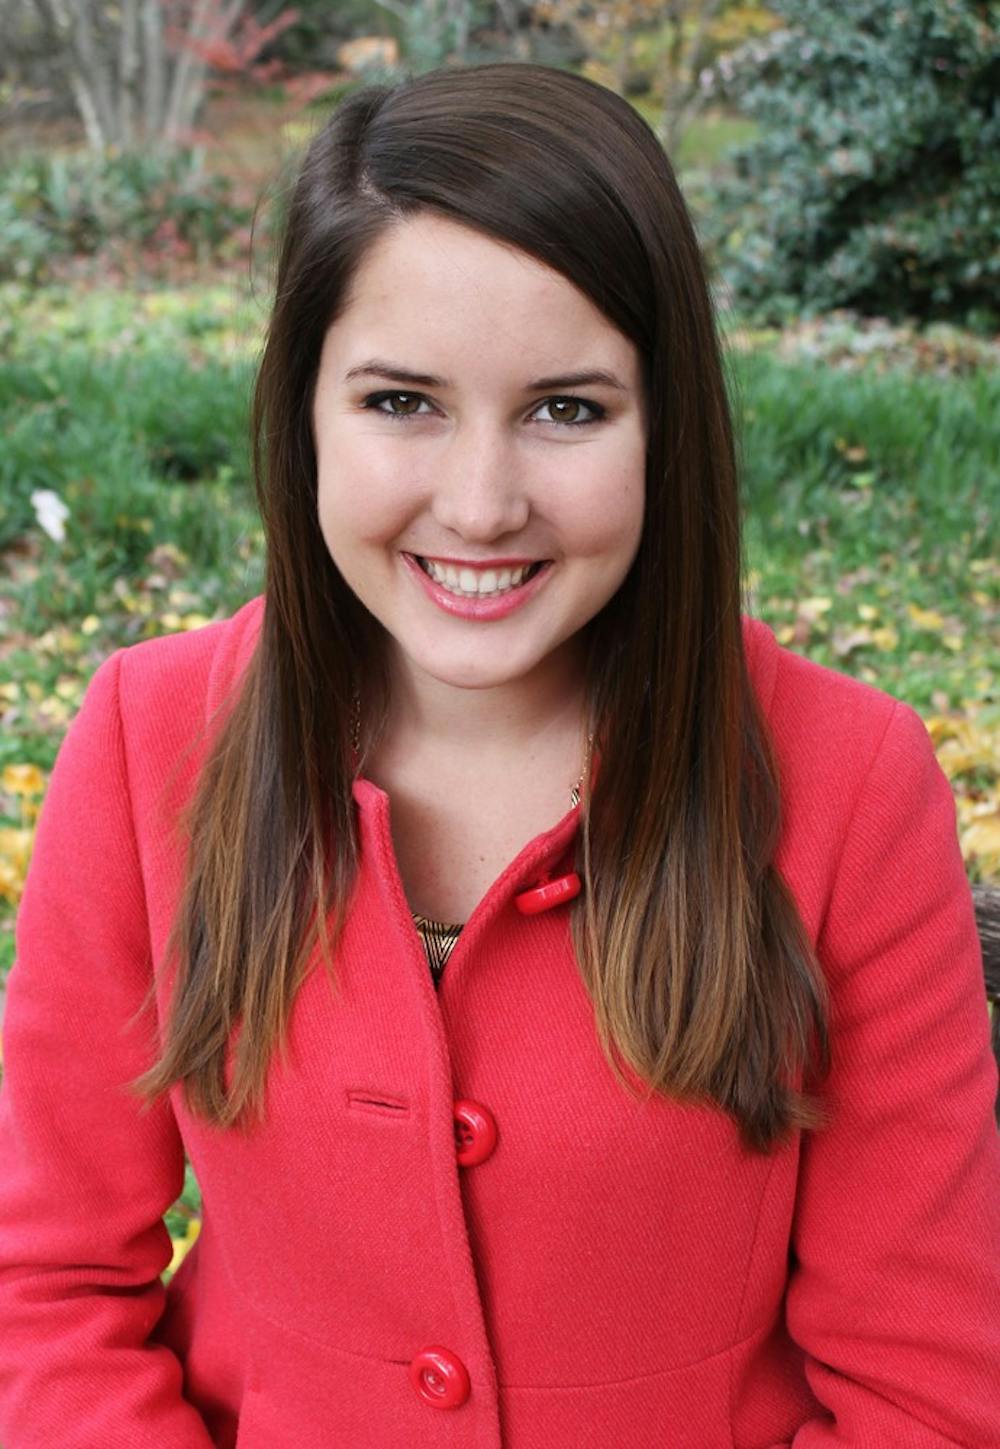 Rachel Brown, a junior from Orange Park, FL, has just been elected the Panhellenic Council President. Having served as vice president of Special Events last year, Rachel said that she wants to be a voice for 1600 of the greatest women that she knows through her new position as president.